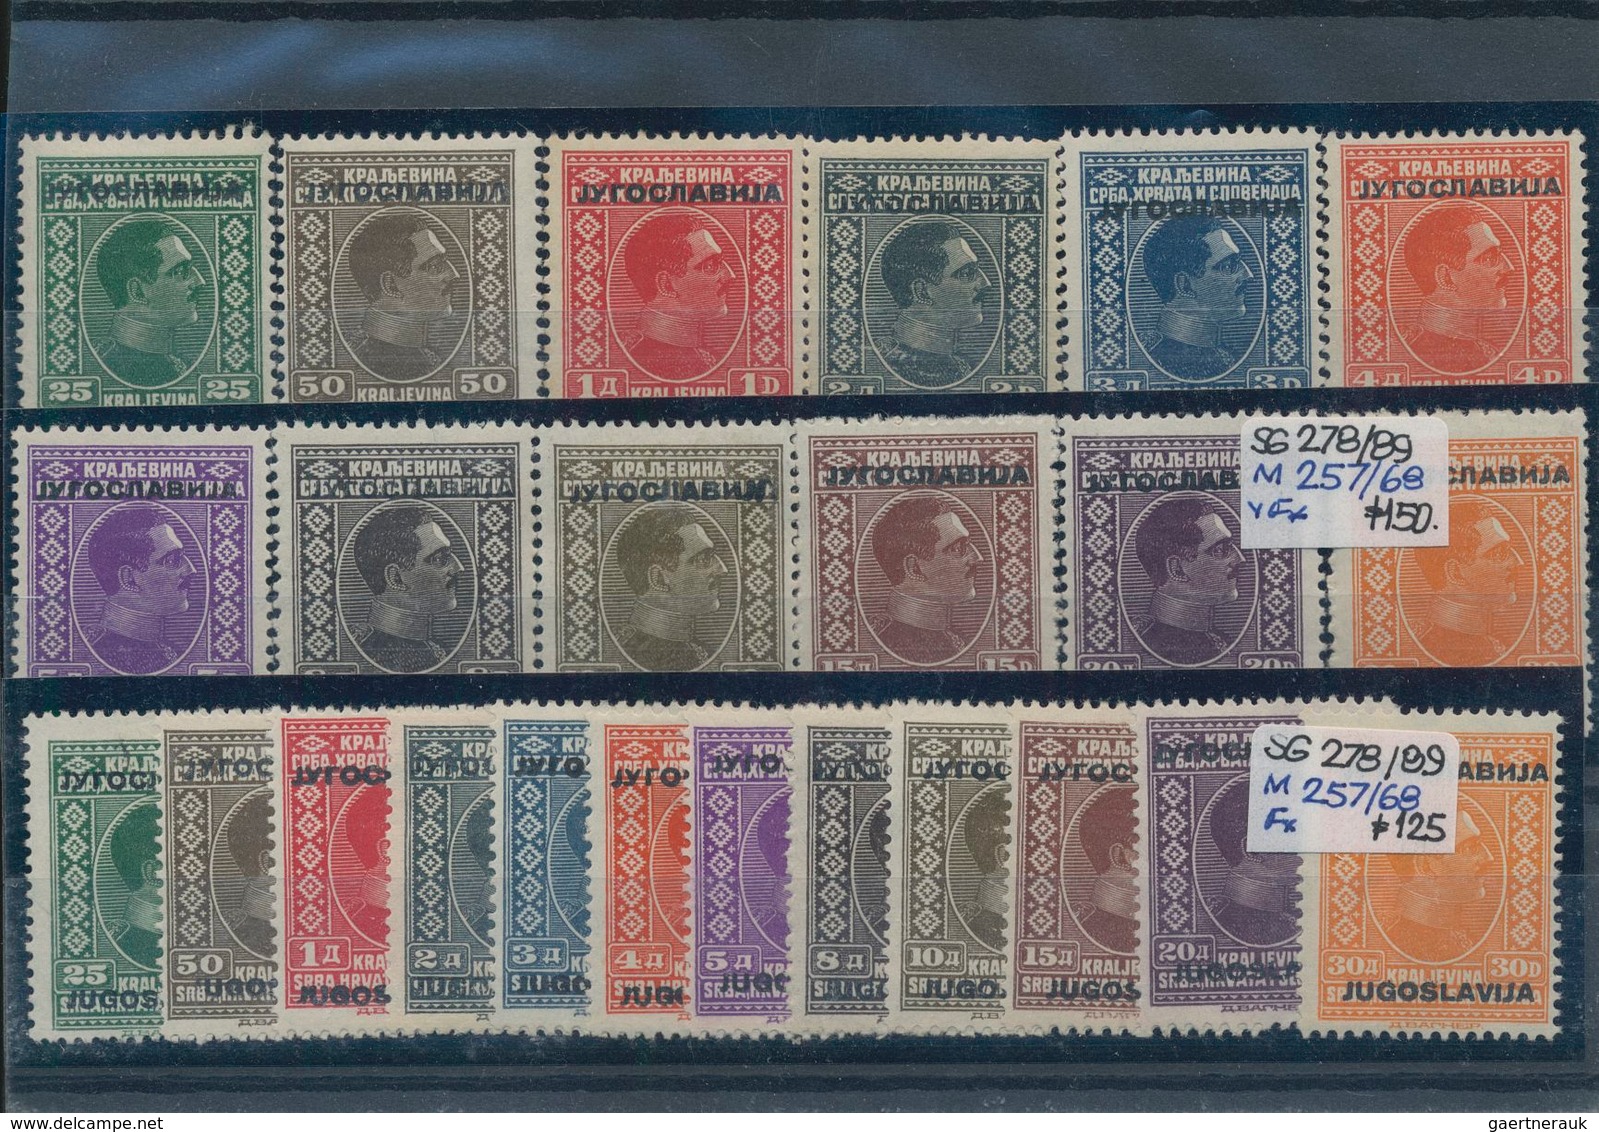 Jugoslawien: 1921/1938, mint and used holding on stockcards in a small binder with many interesting